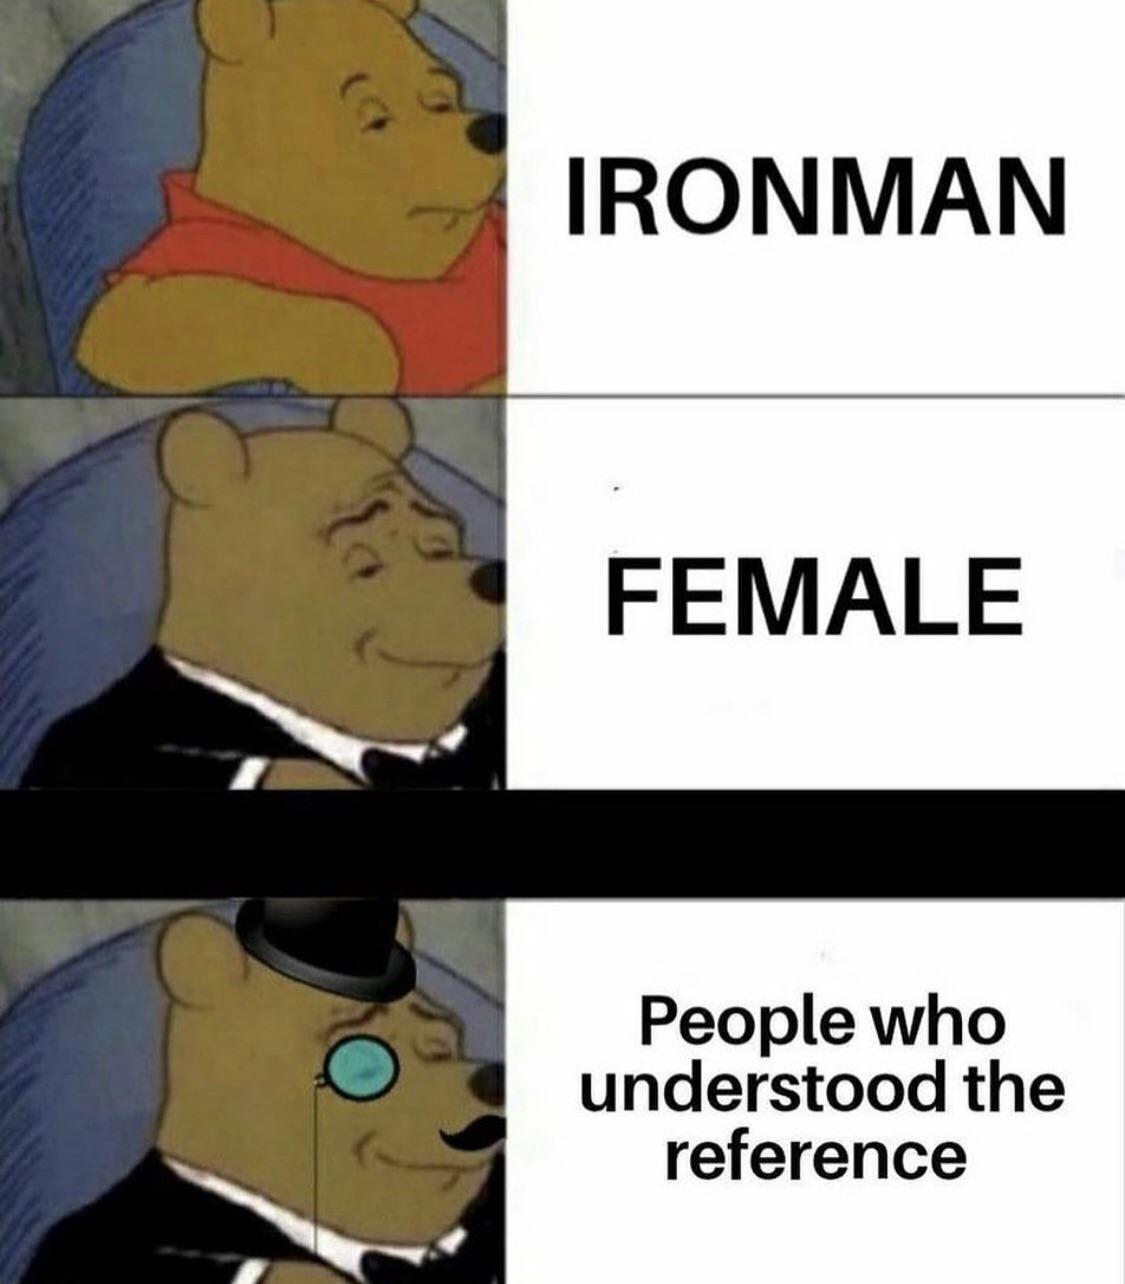 fastest gun in the west meme - Ironman Female People who understood the reference